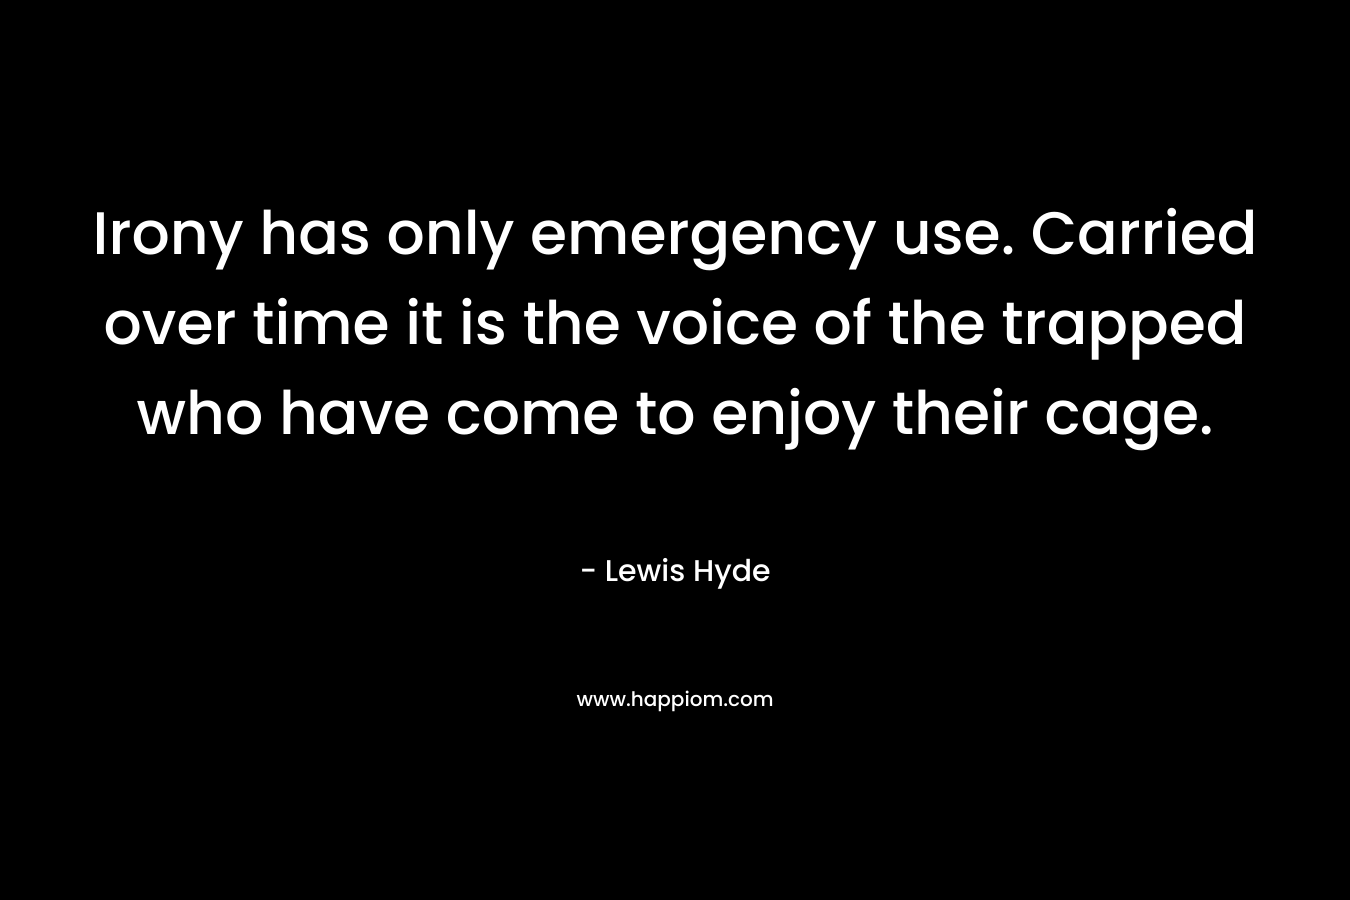 Irony has only emergency use. Carried over time it is the voice of the trapped who have come to enjoy their cage. – Lewis Hyde